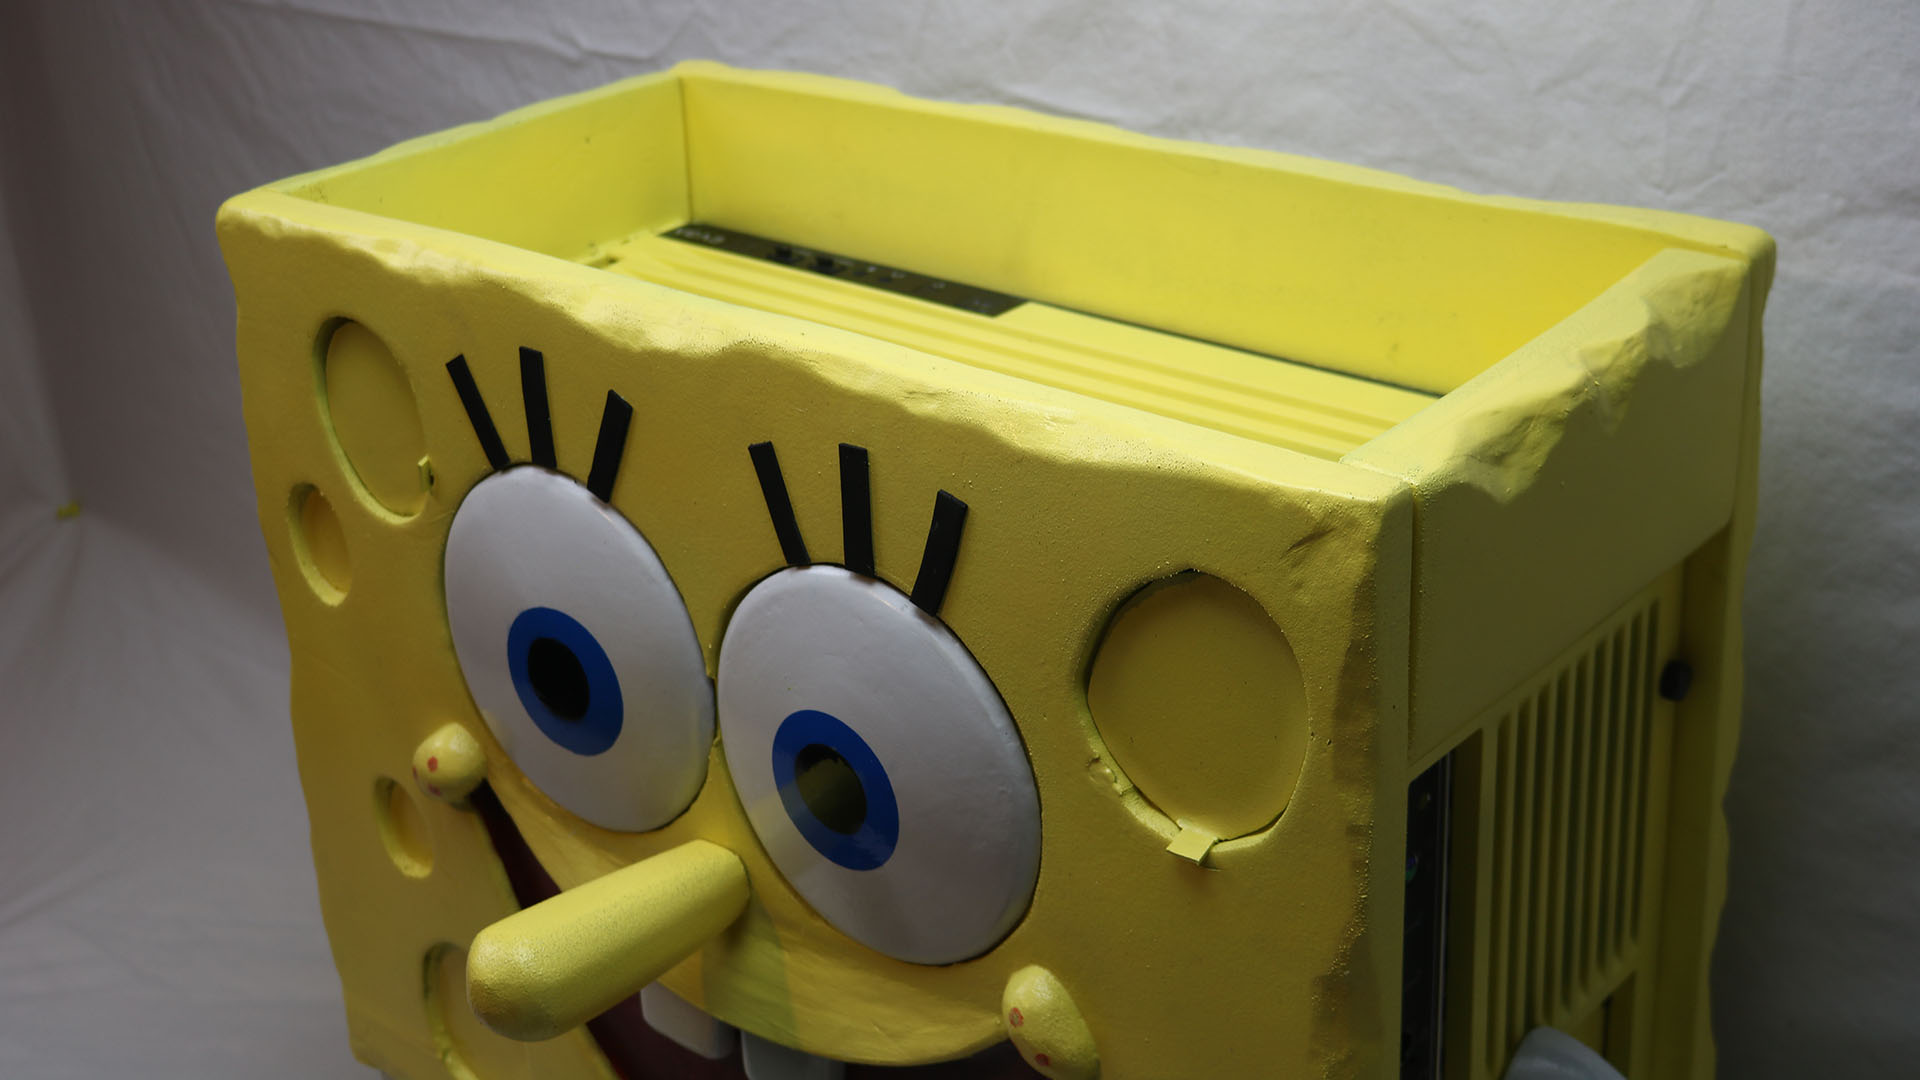 The top of the Spongebob Squarepants gaming PC with vents